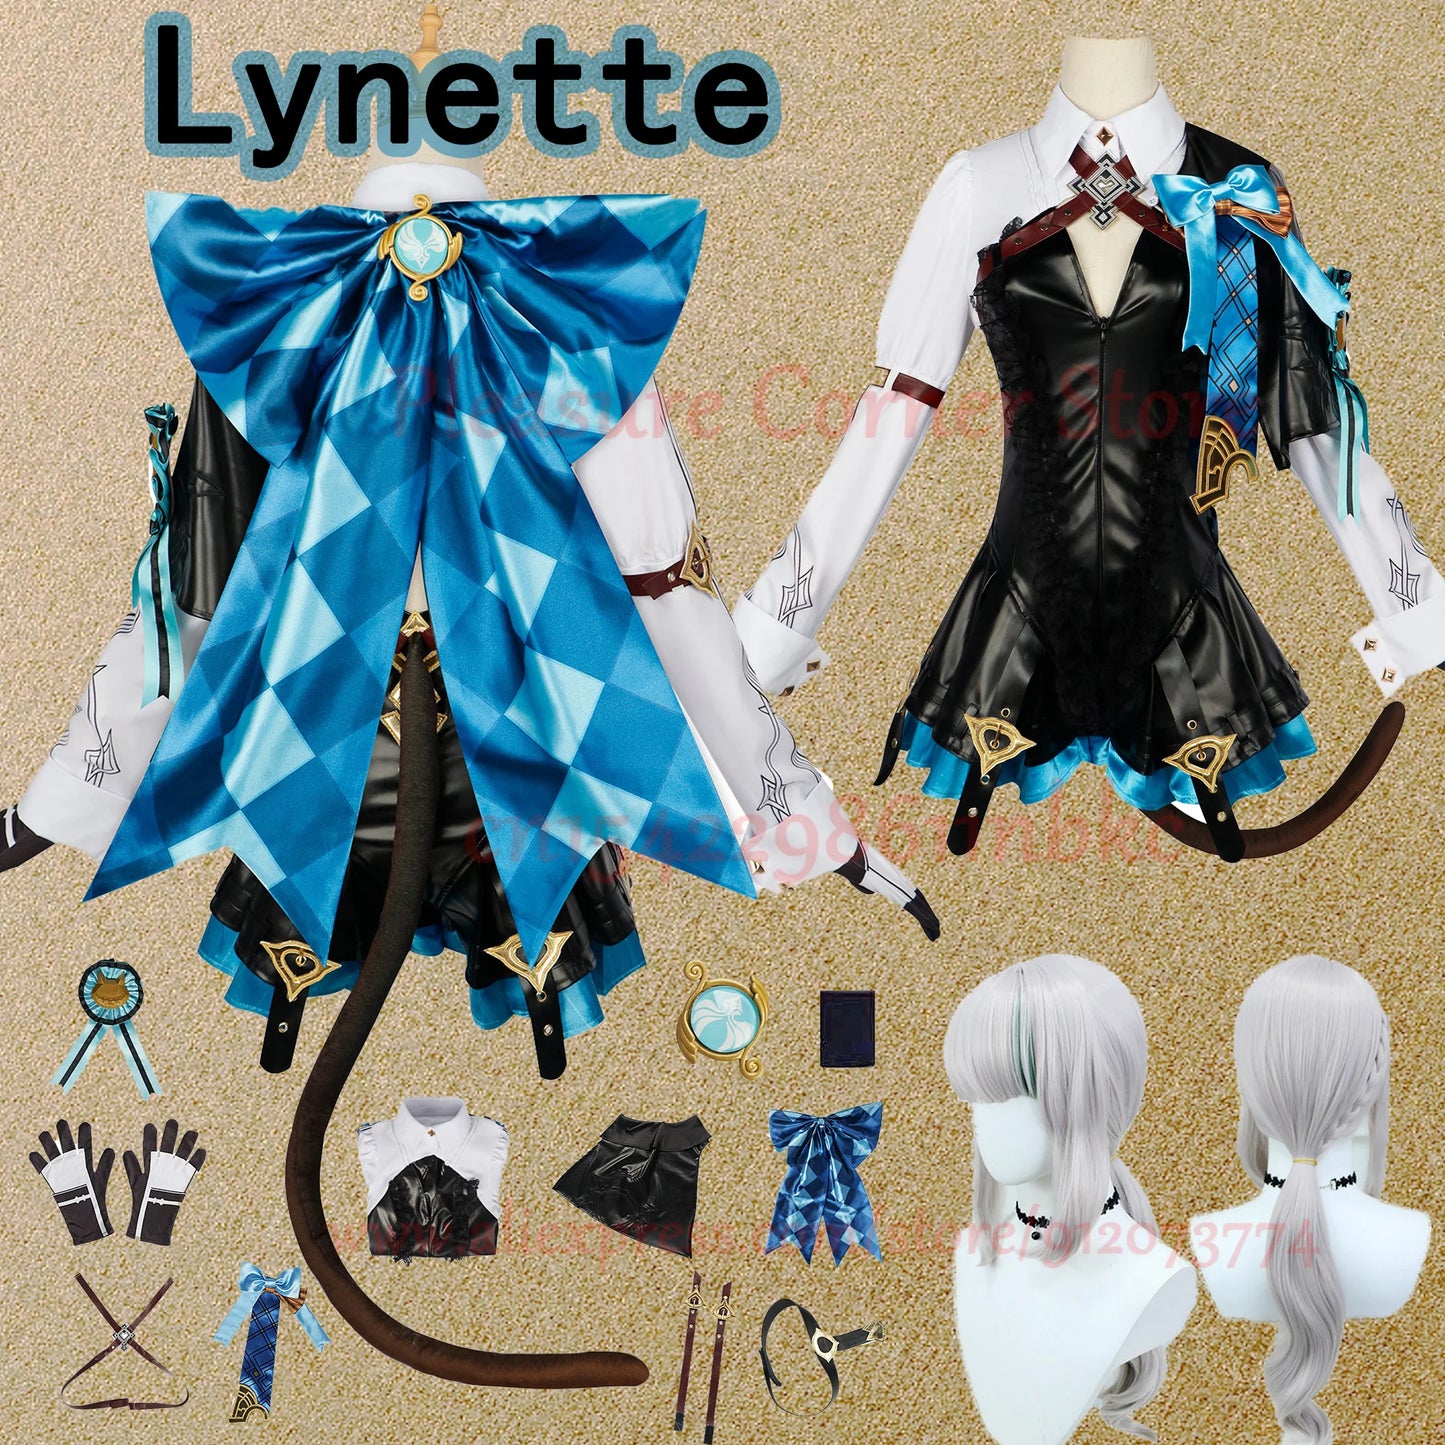 Lyney Cosplay déguisement Genshin Impact Lynette Cosplay déguisement perruque Fontaine cuir Cosplay déguisement uniforme robe tenue magicien